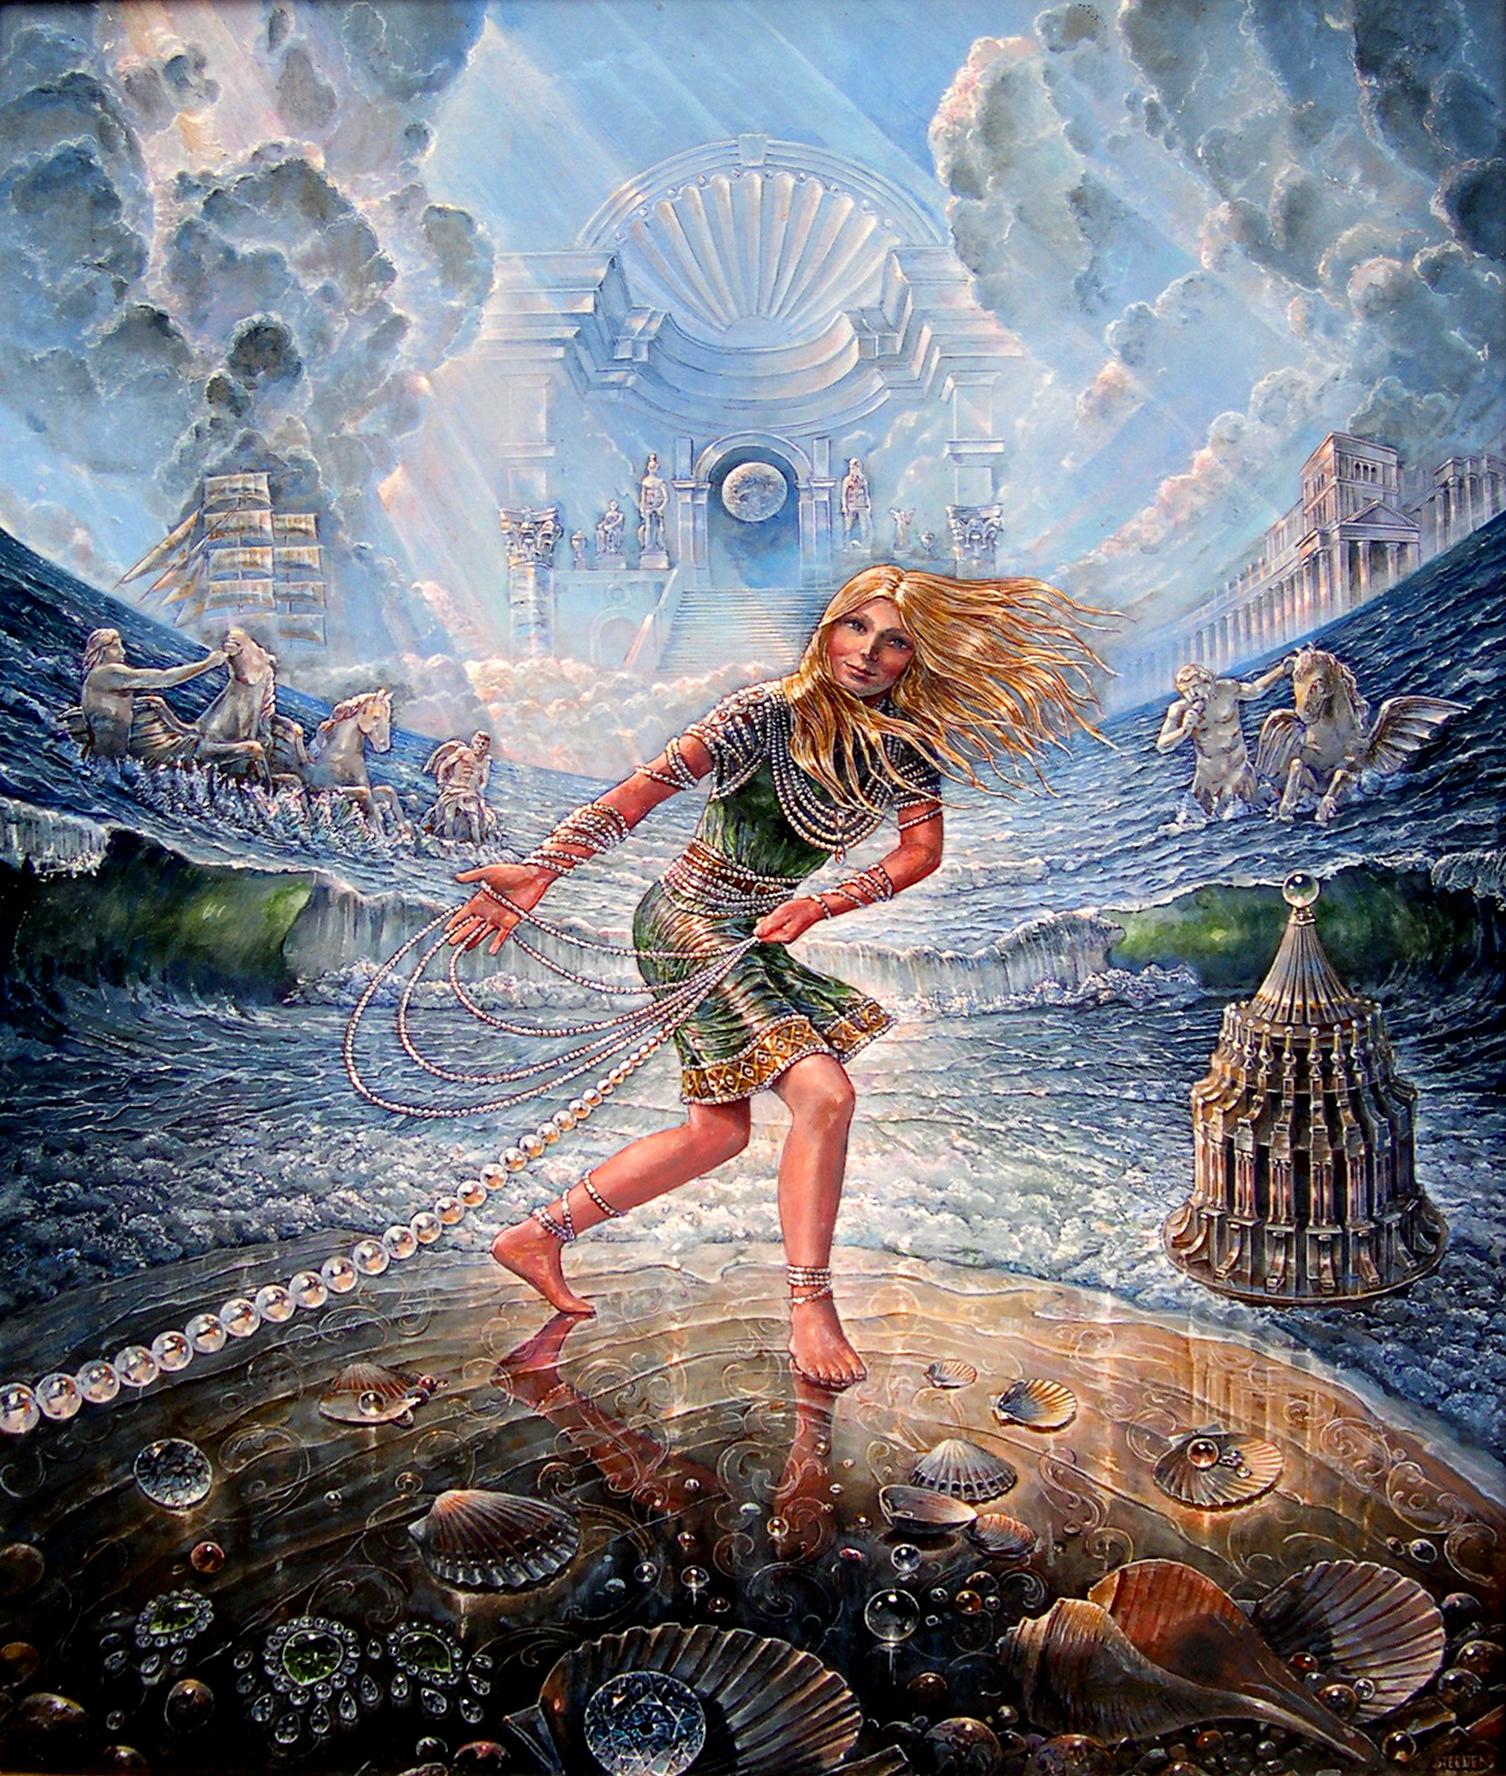 "Our Lady of the Foam", John Stephens, Acrylic Painting, Surrealism, 24x30